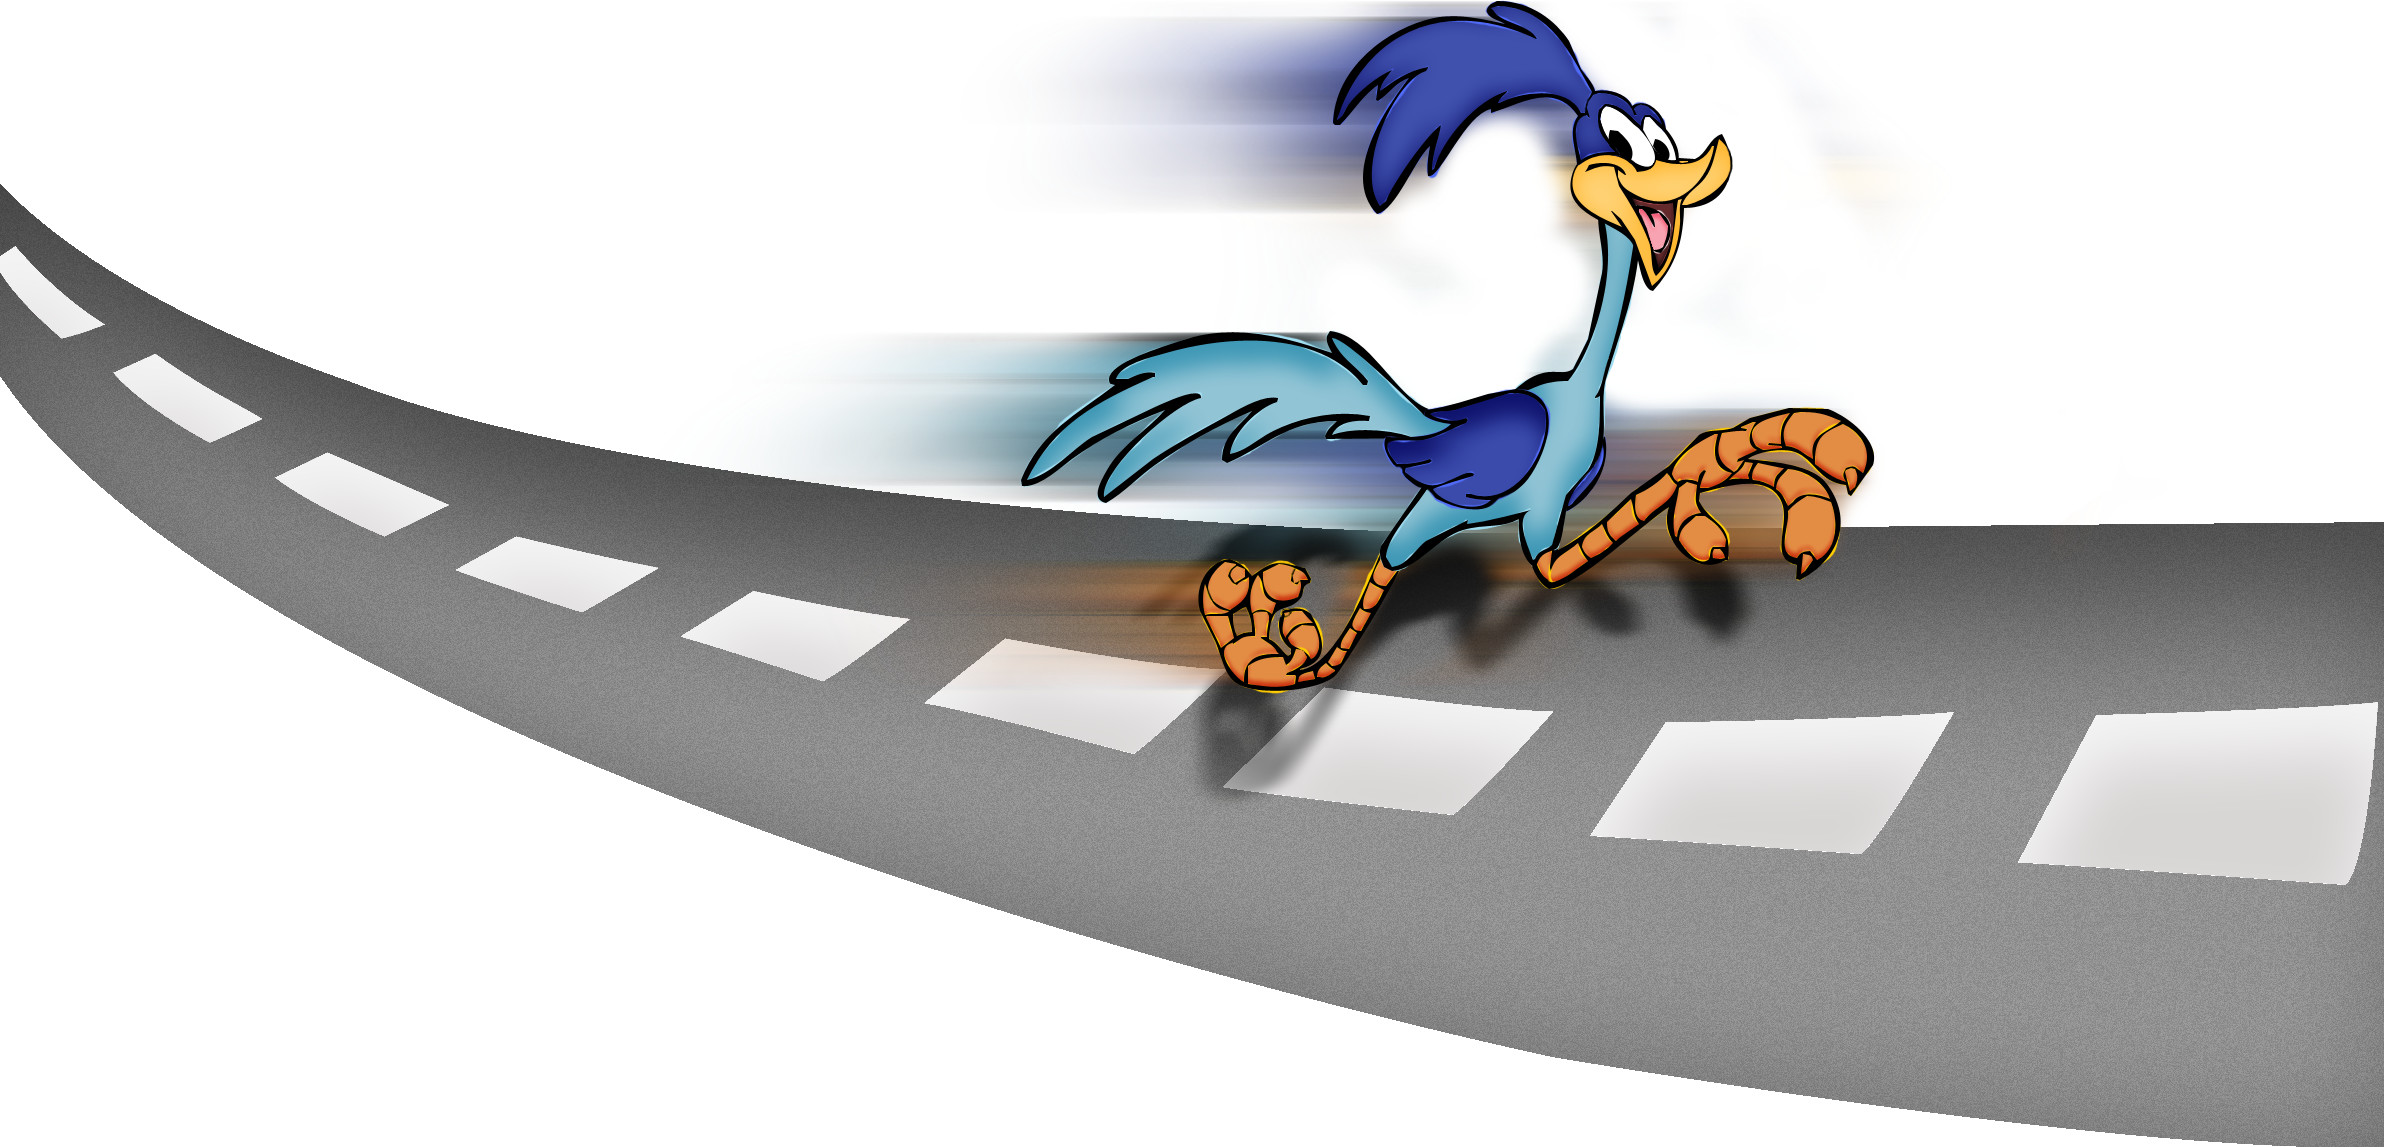 2384x1147 Clipart library: More Artists Like The Road Runner on a road by ksbansal